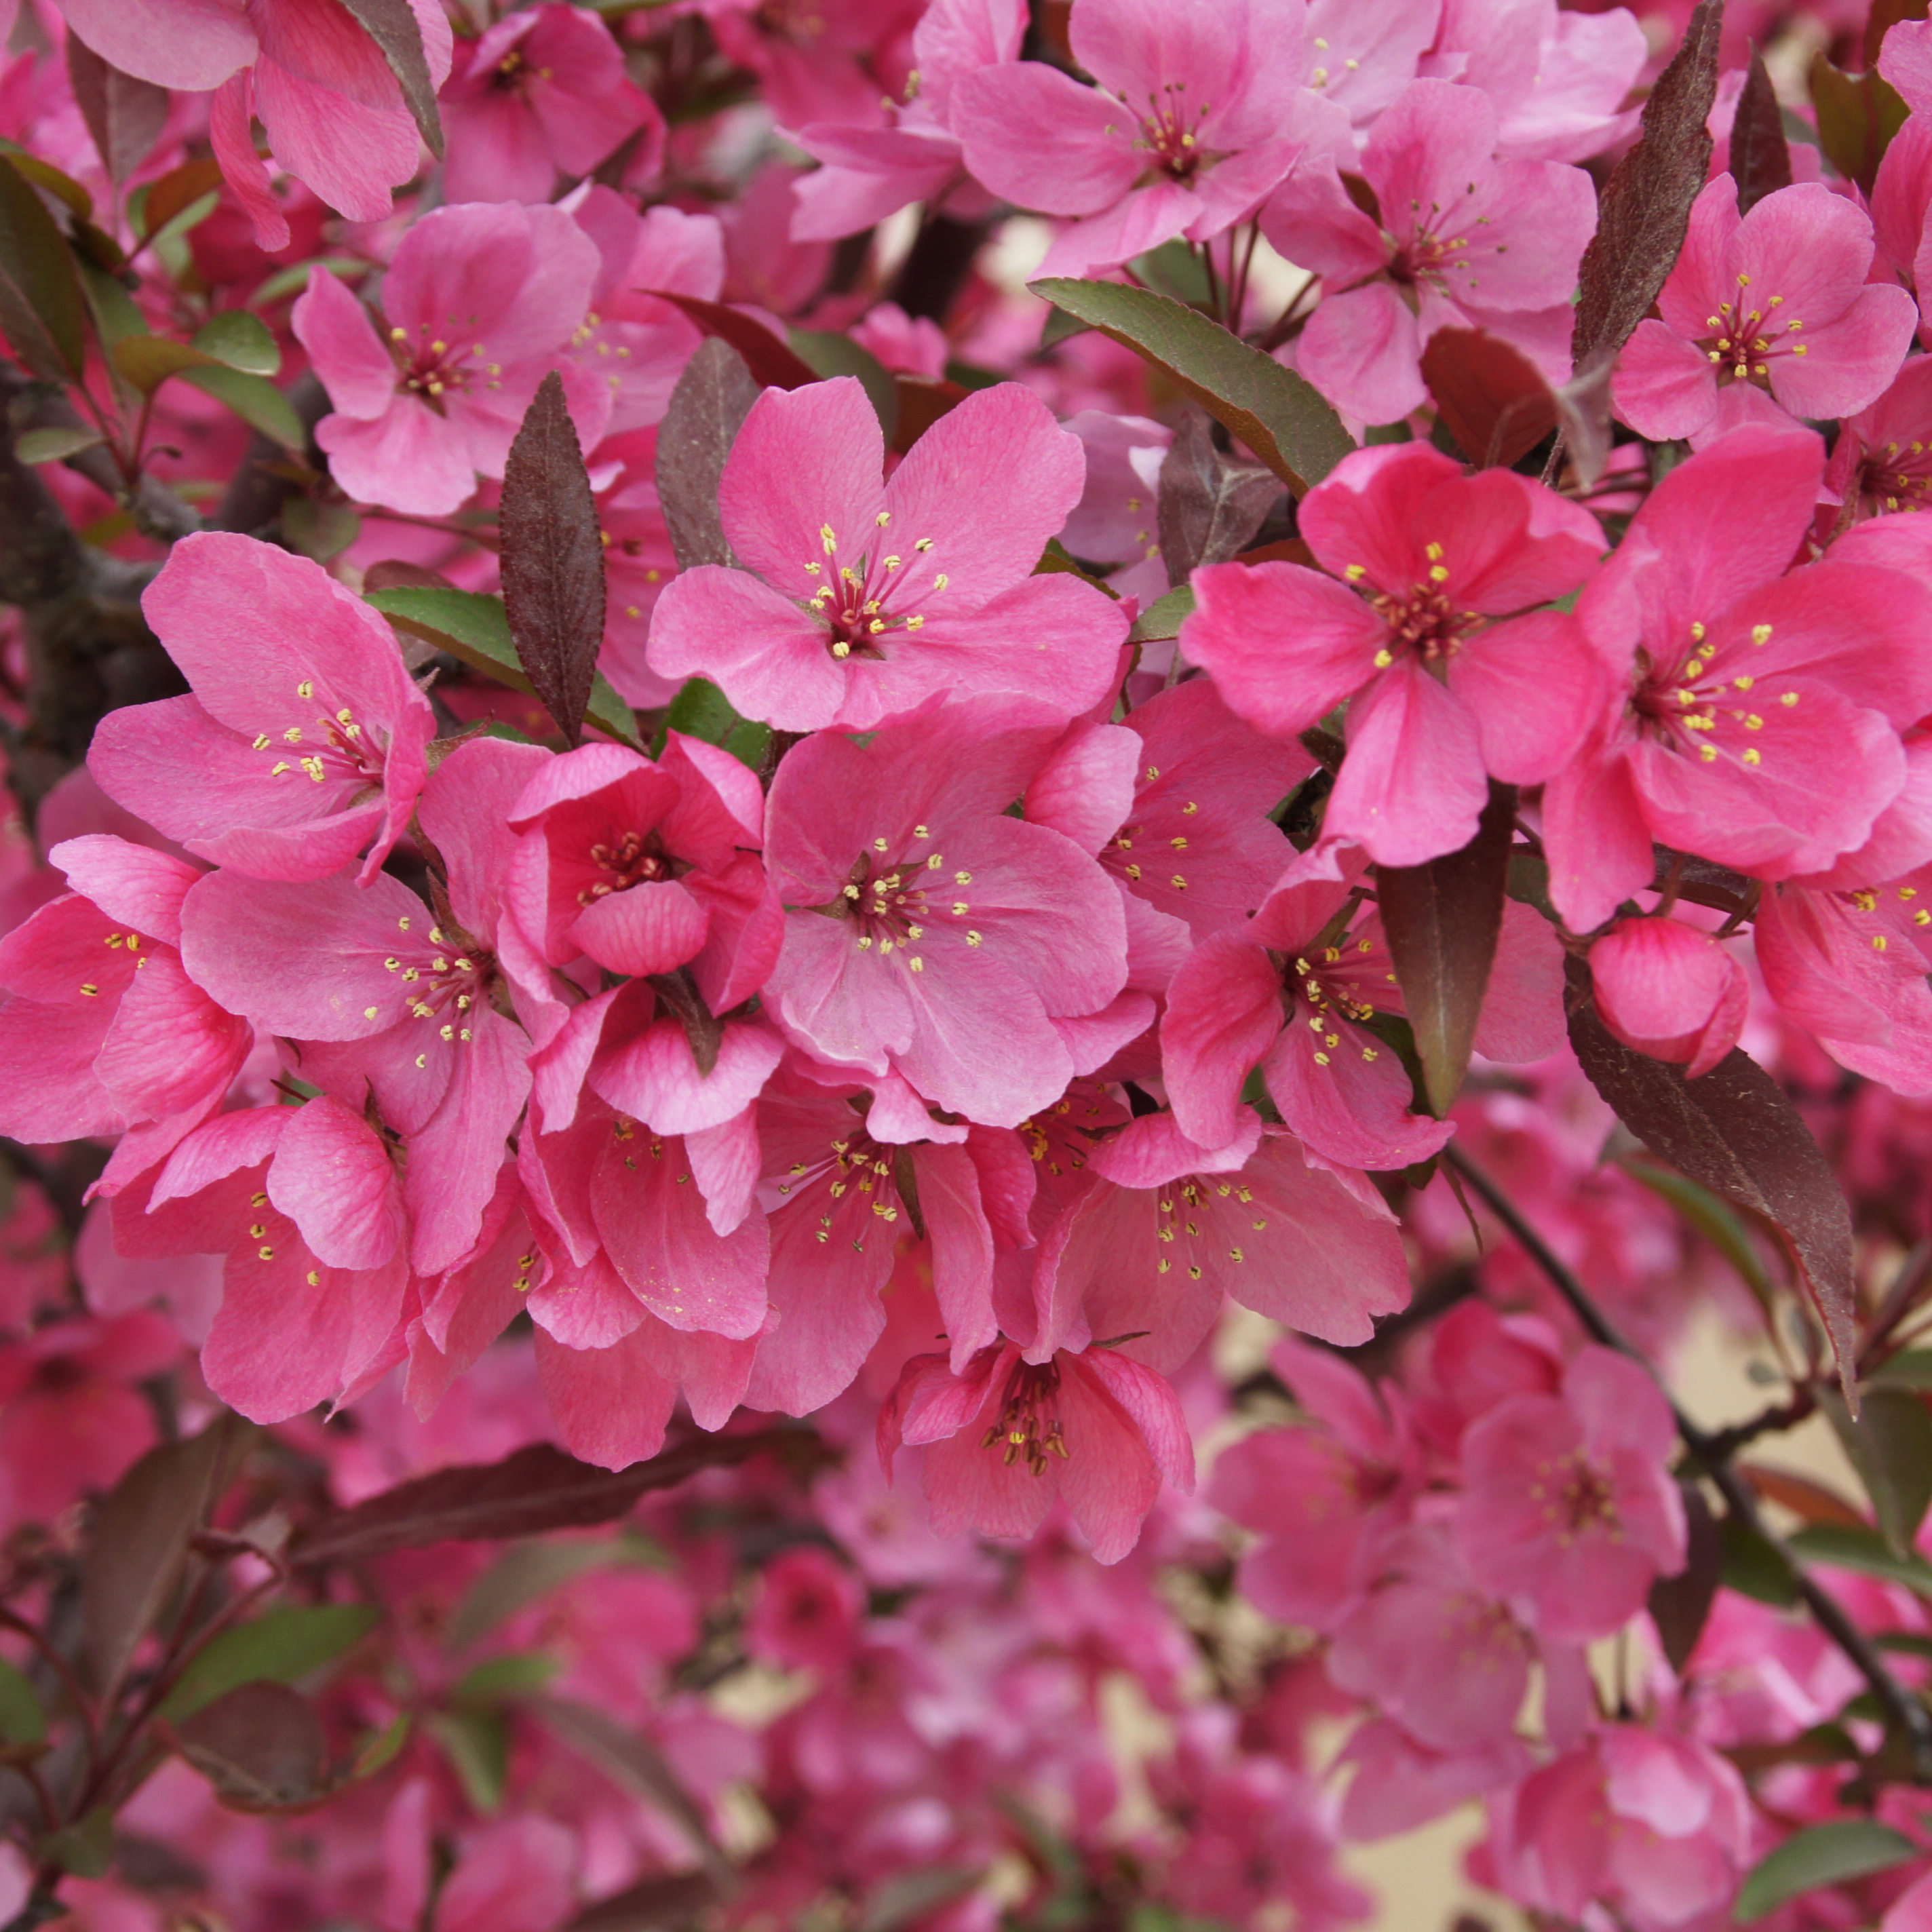 A close up view of the pink flowers of Show Time crabapple